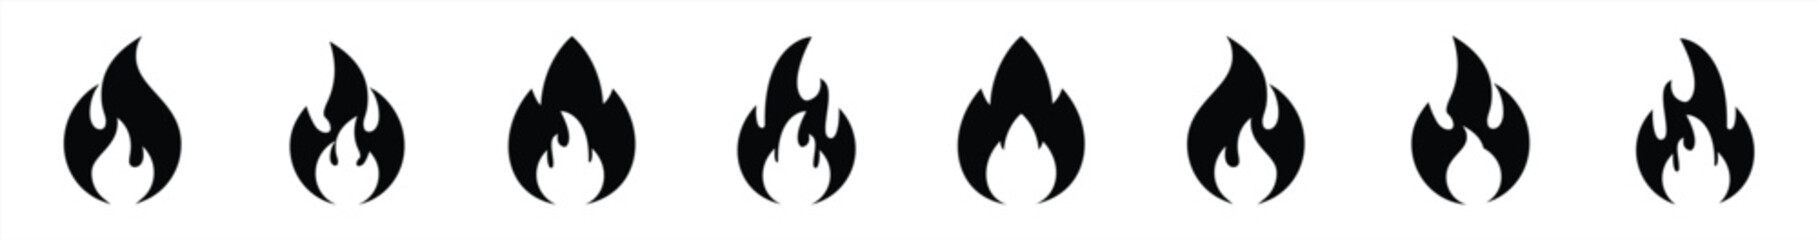 Fire icons set, flames, flame of various shapes, bonfire. Fire icon collection. Vector illustration.